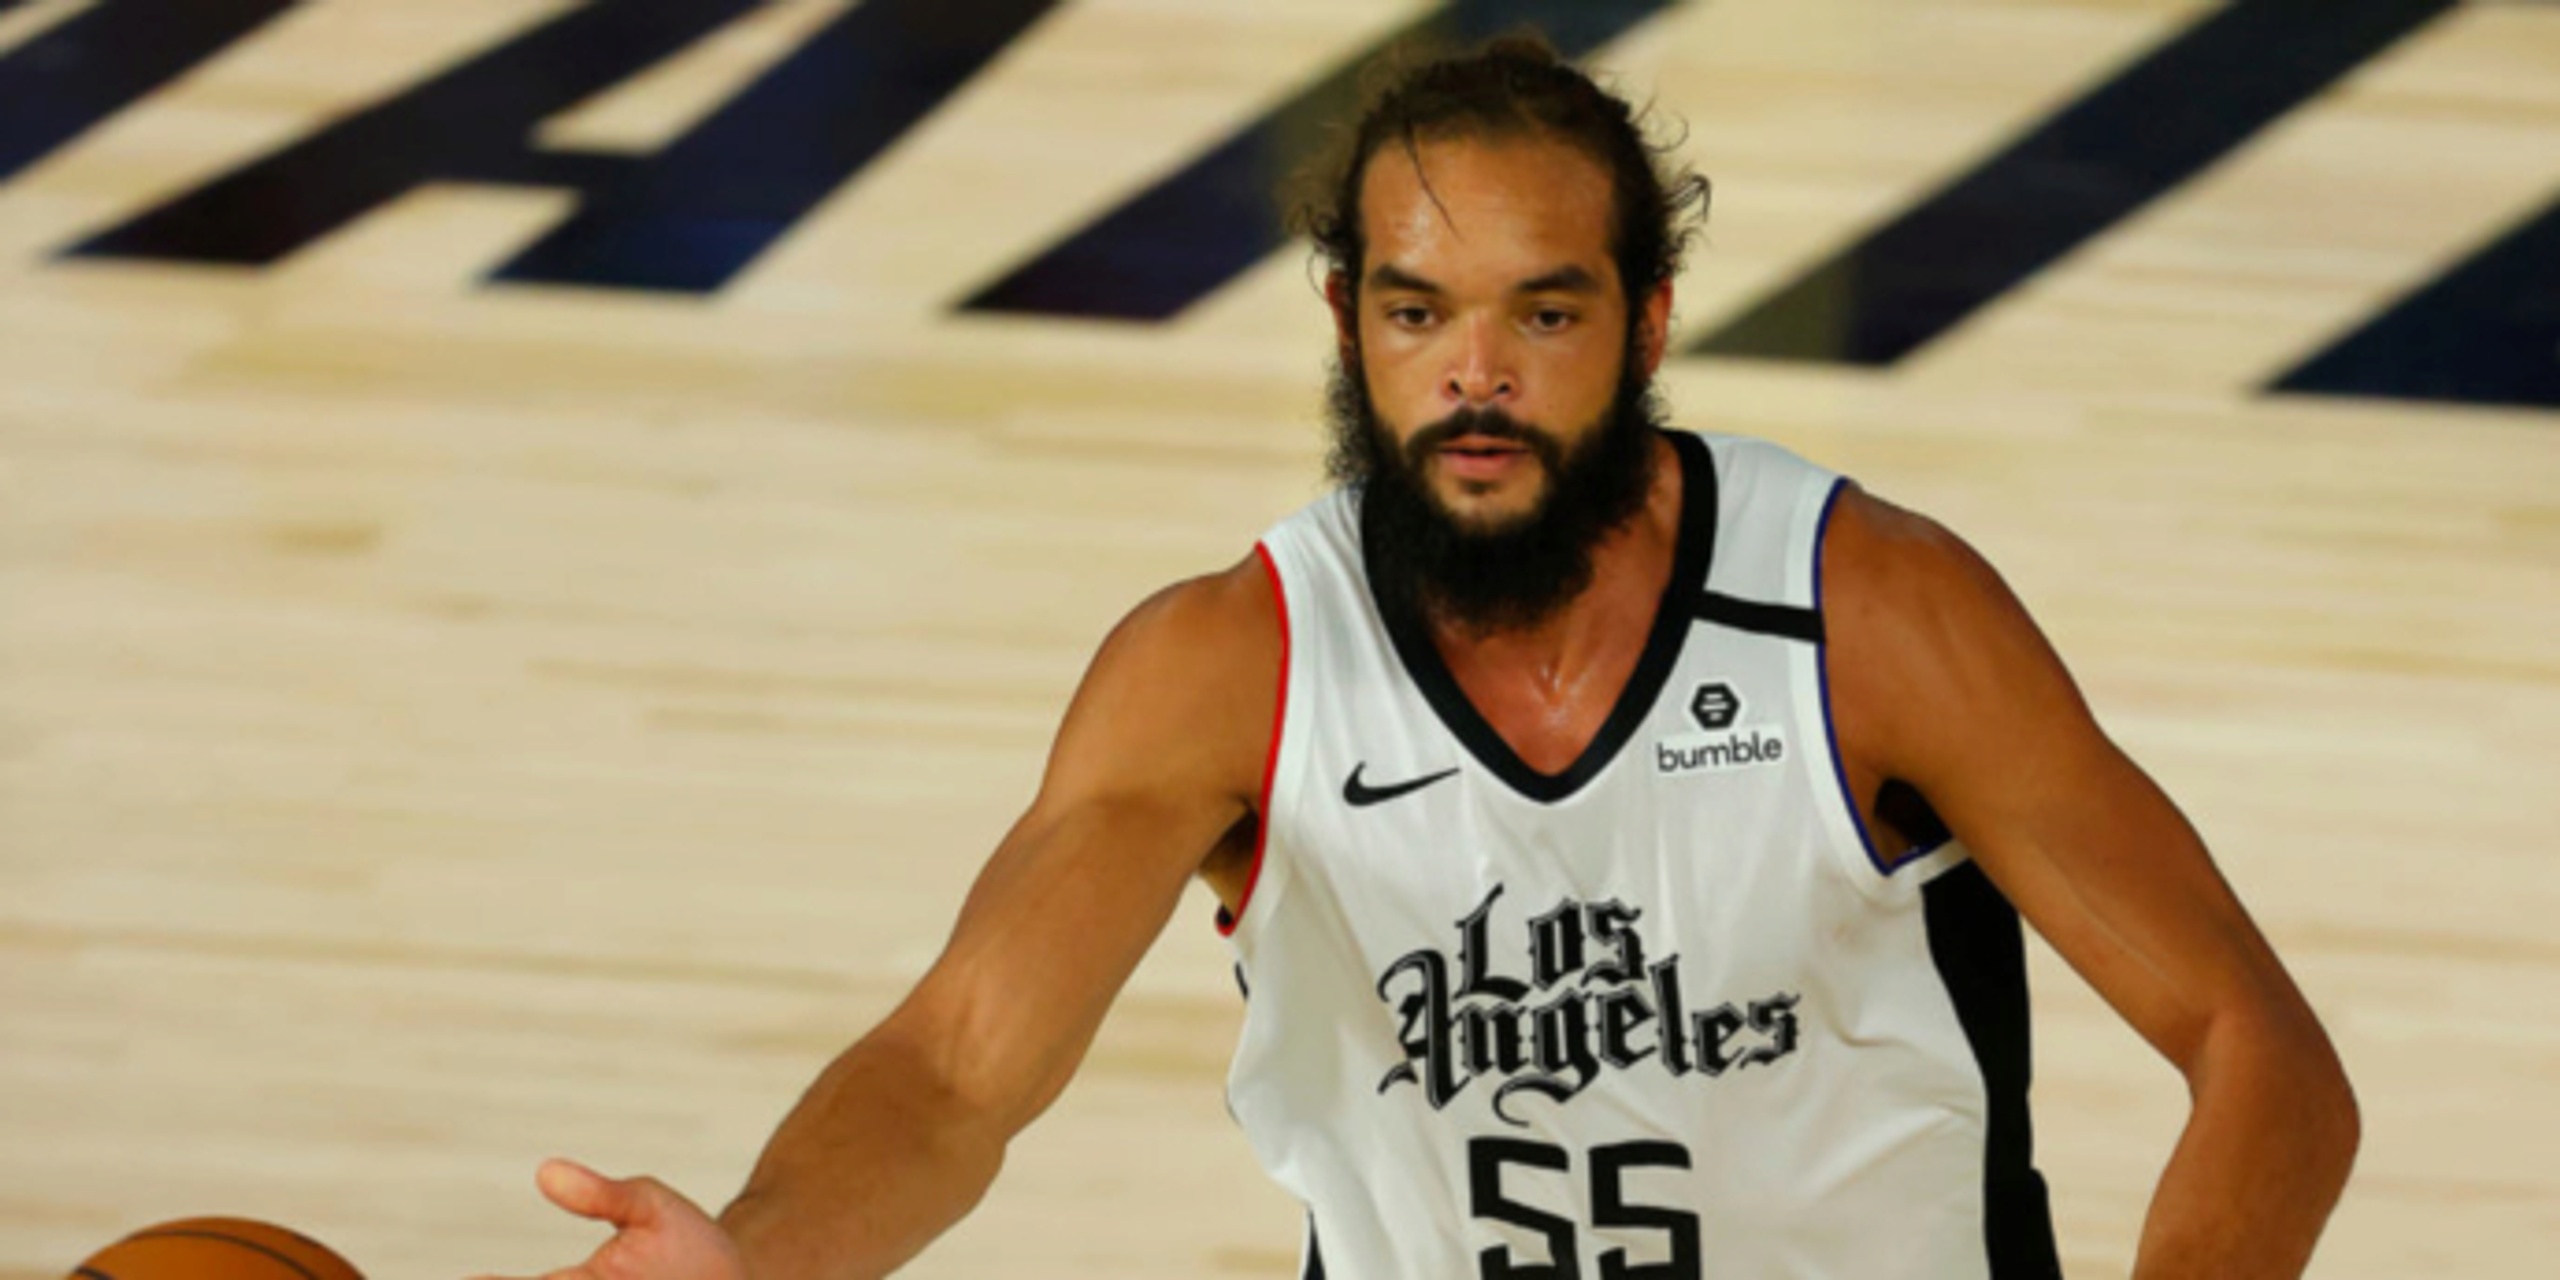 Joakim Noah retiring from basketball, plans to end career with Bulls